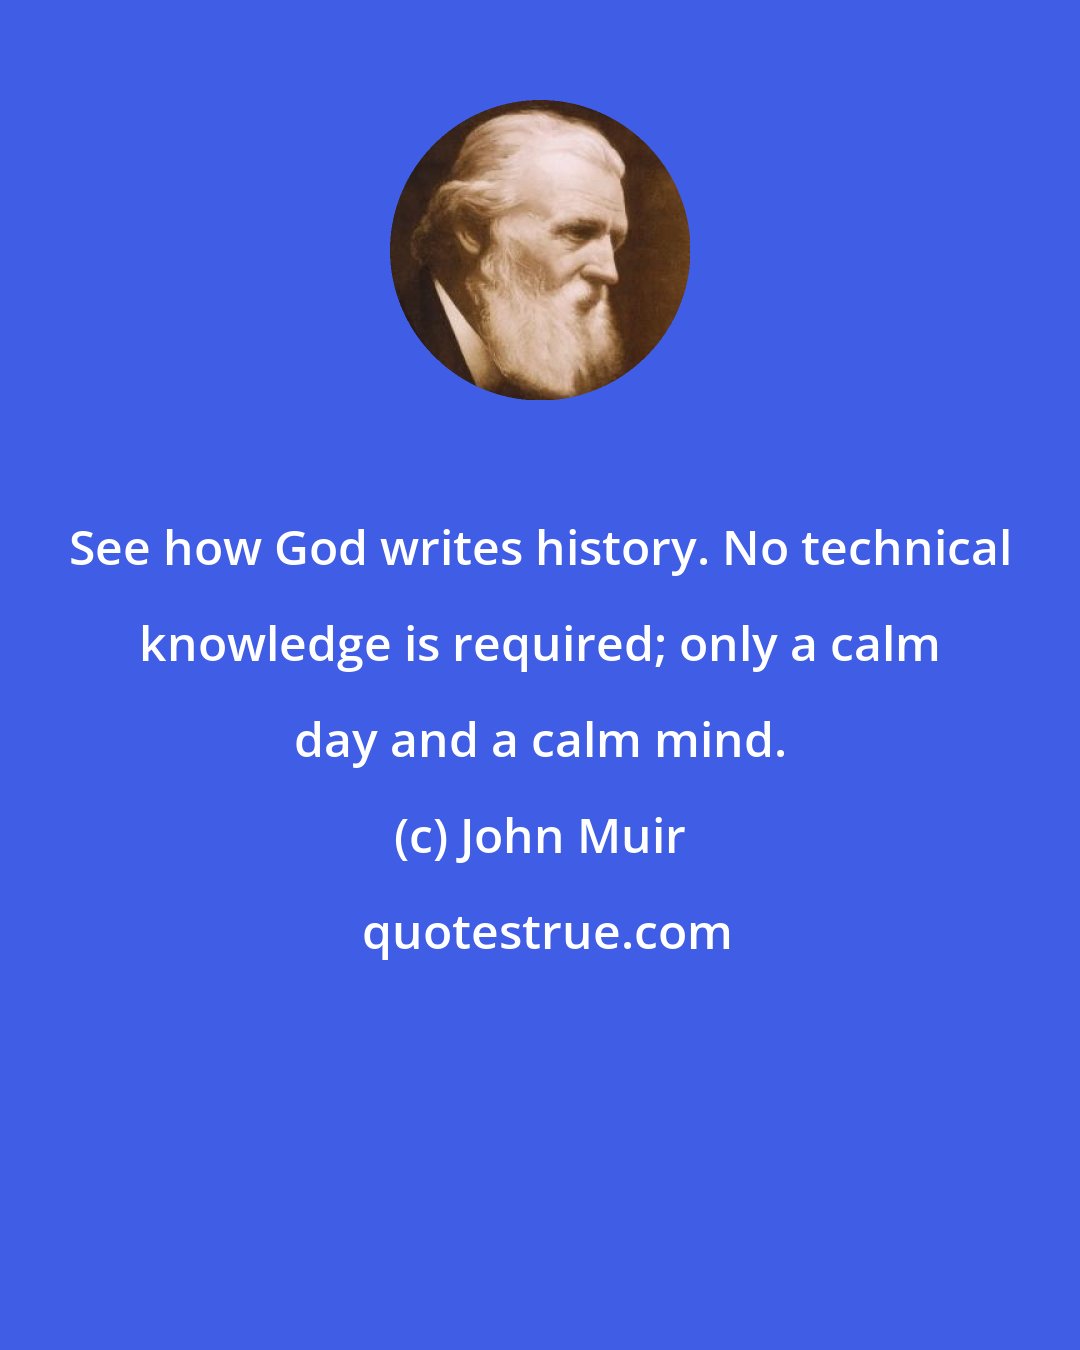 John Muir: See how God writes history. No technical knowledge is required; only a calm day and a calm mind.